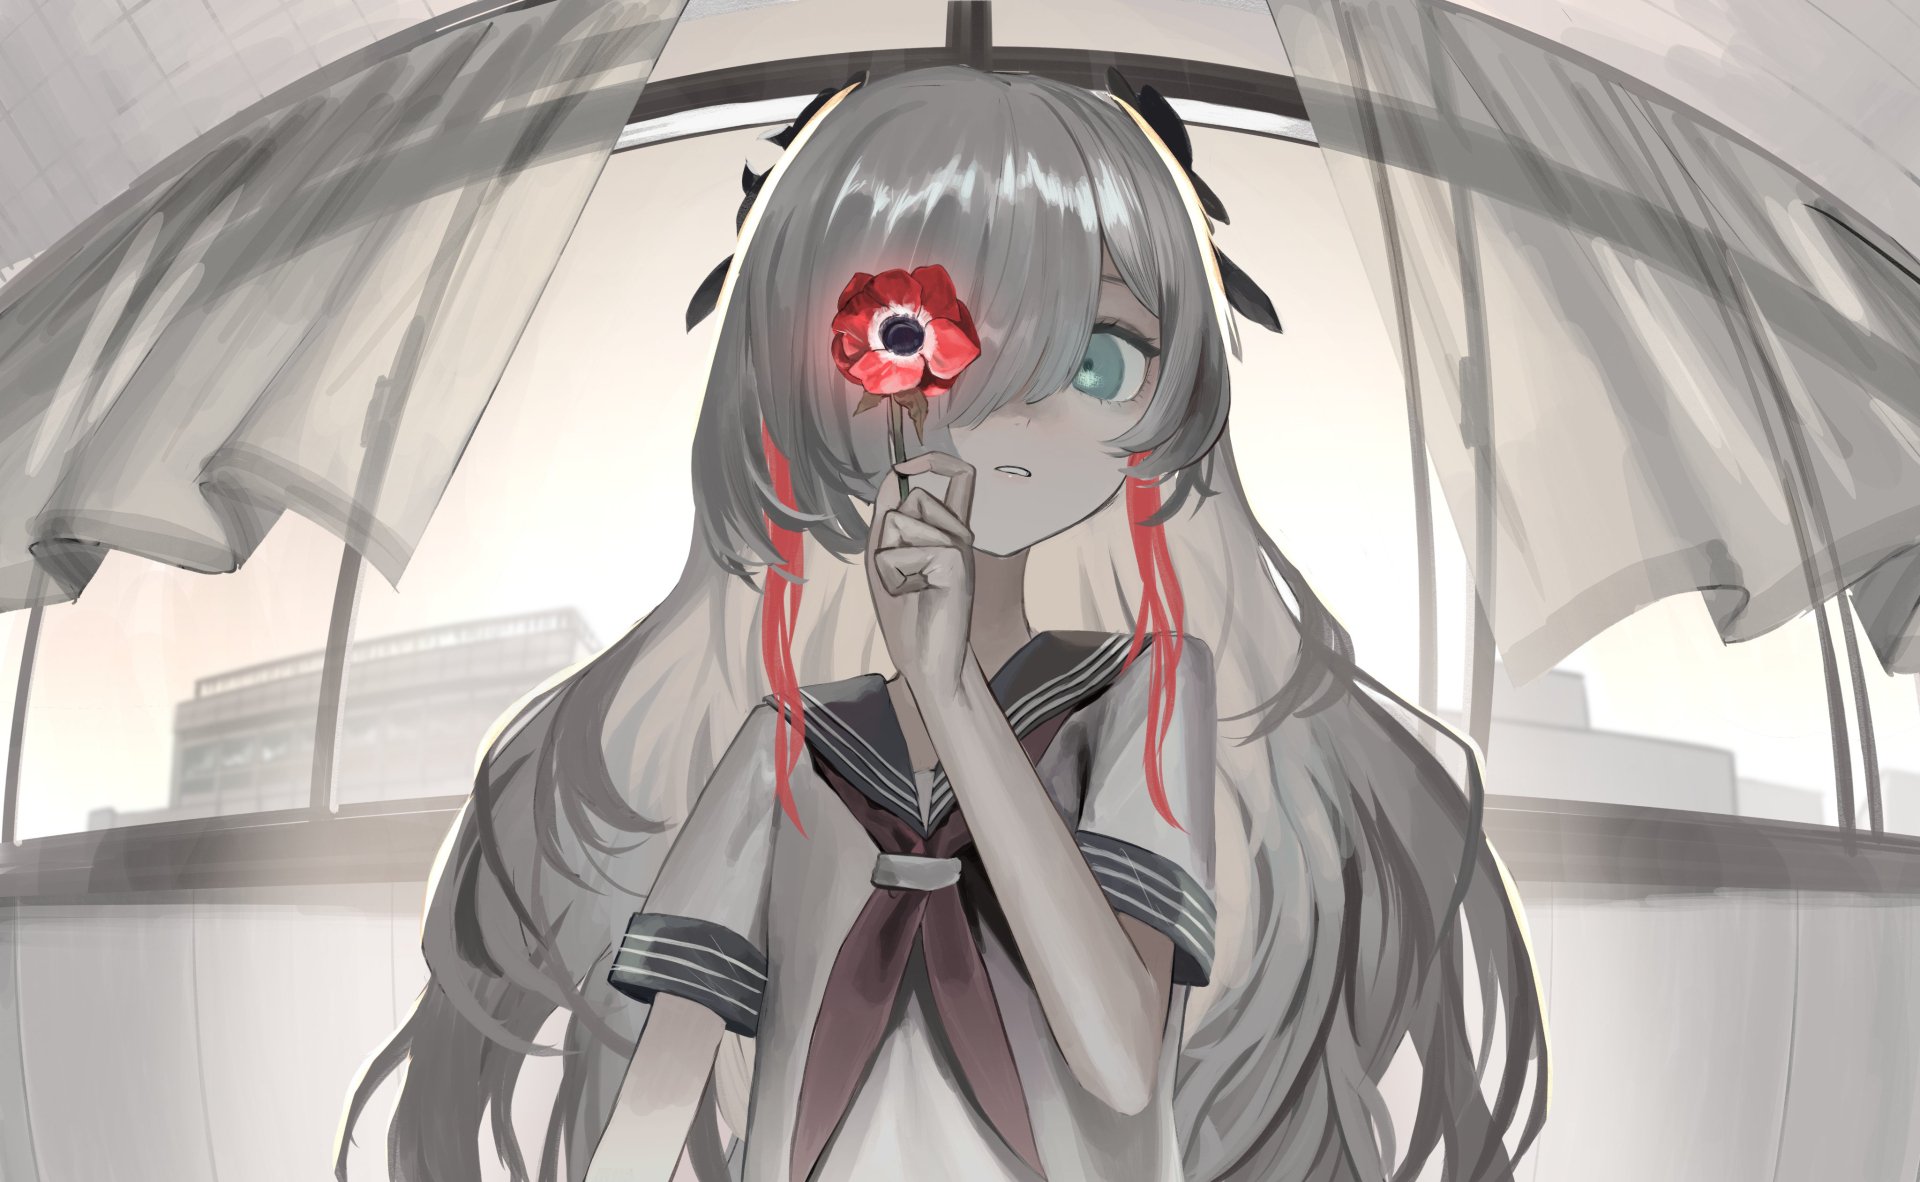 sad anime girl with white hair and red eyes